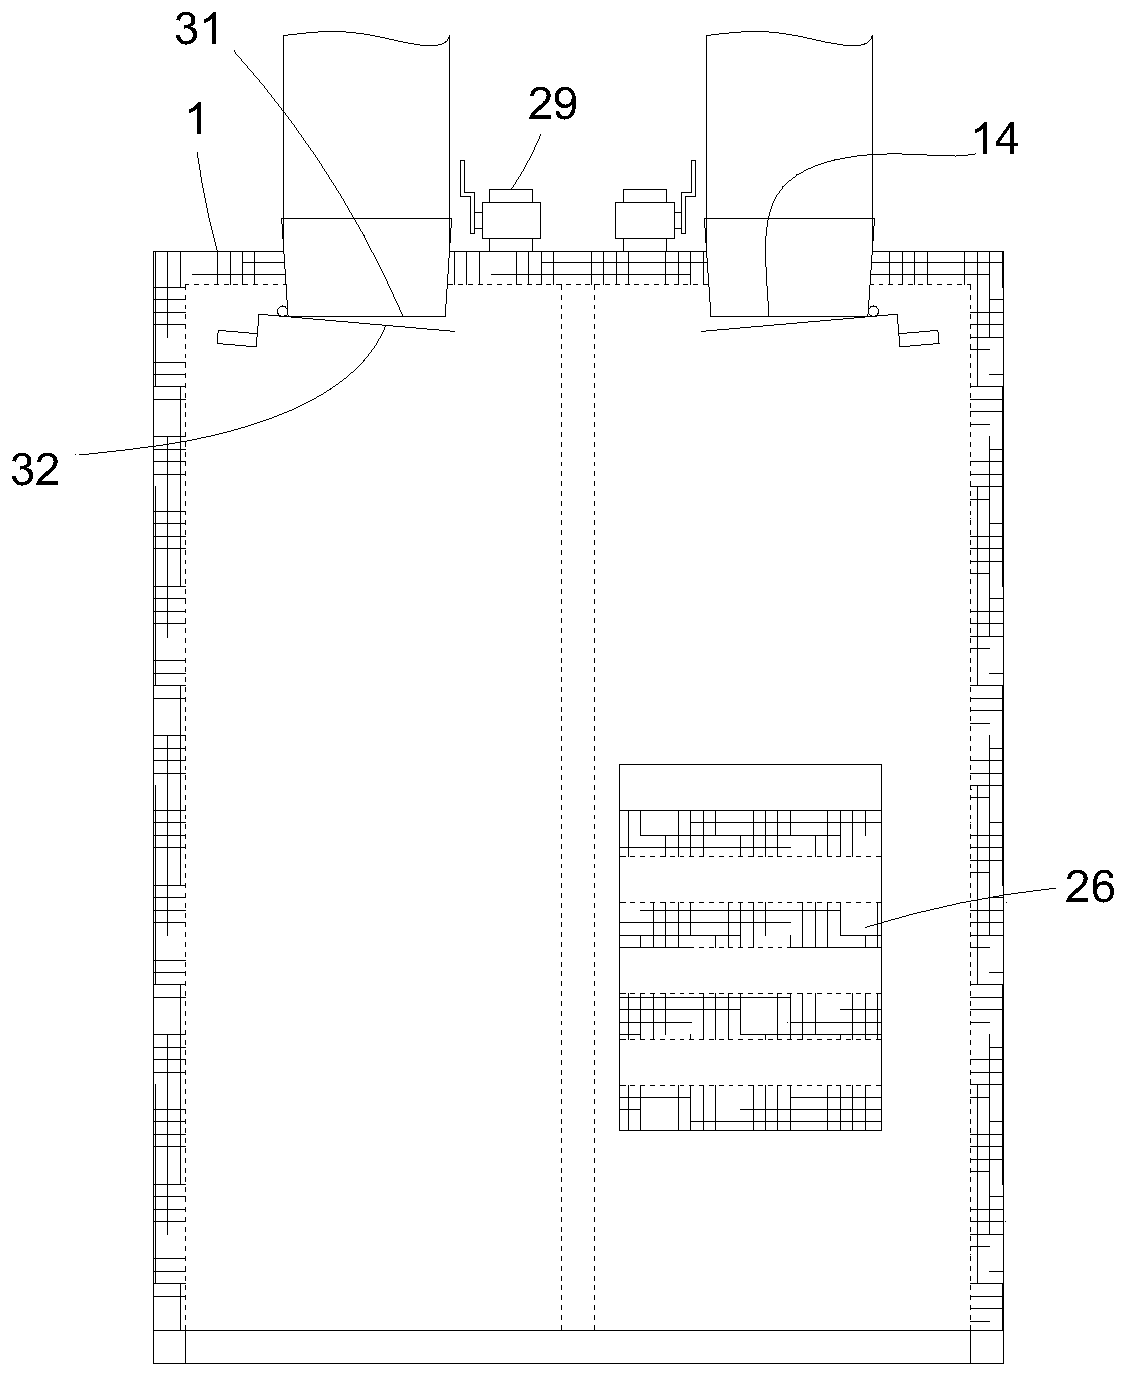 Dust suction and noise reduction device for continuous operation of hosiery machine and method of using same